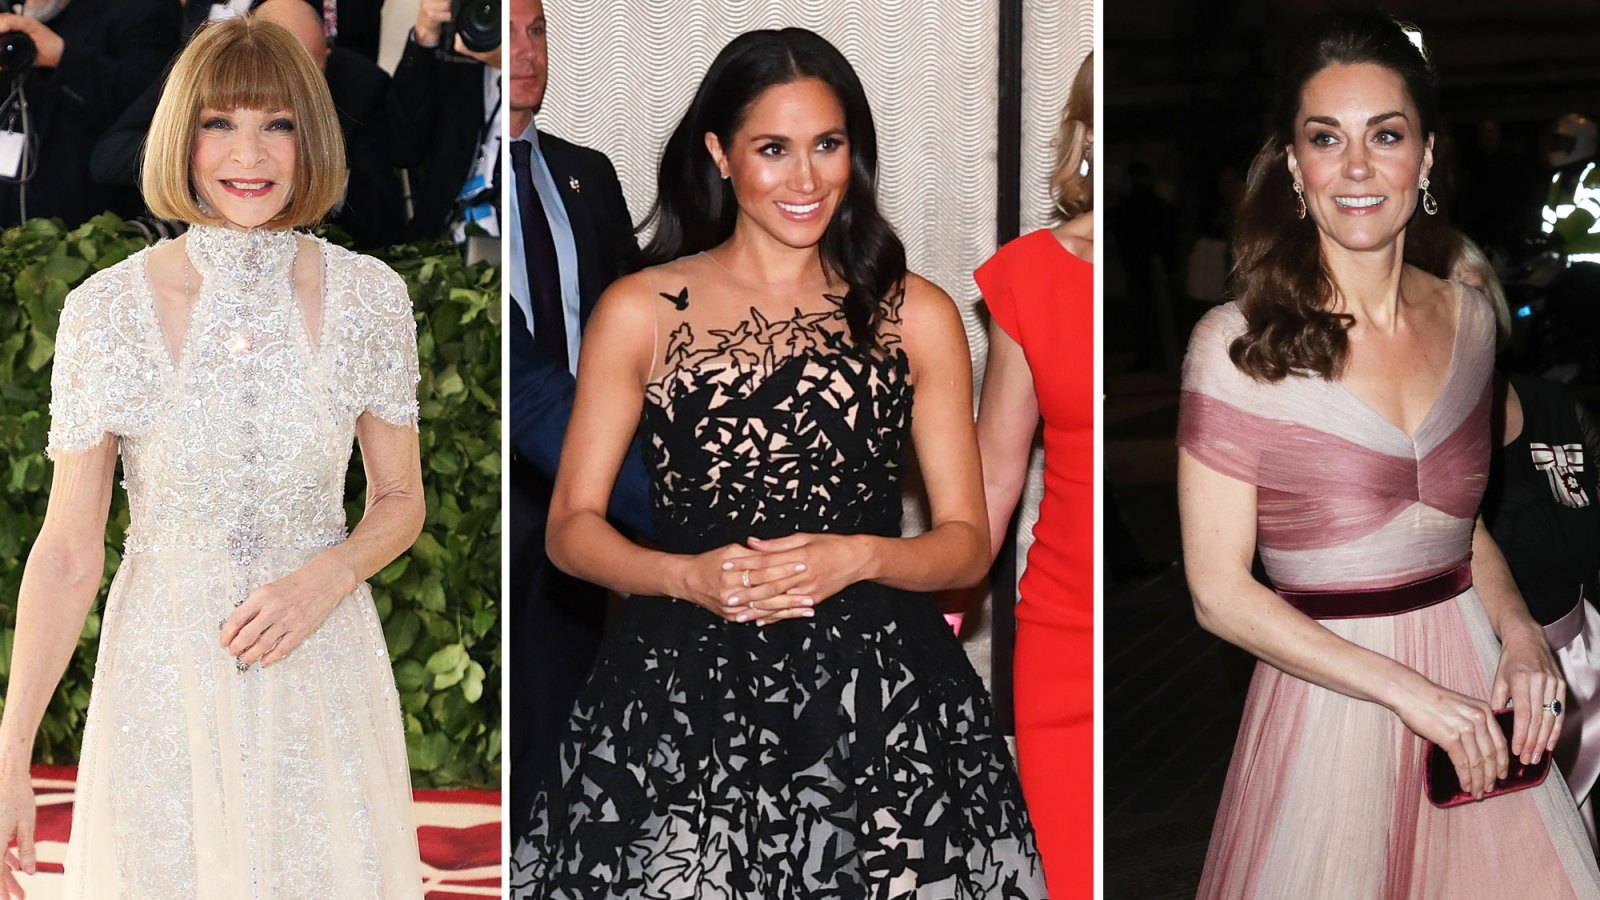 Anna Wintour Reveals Duchess Meghan and Duchess Kate Are Her Dream Met Gala Guests